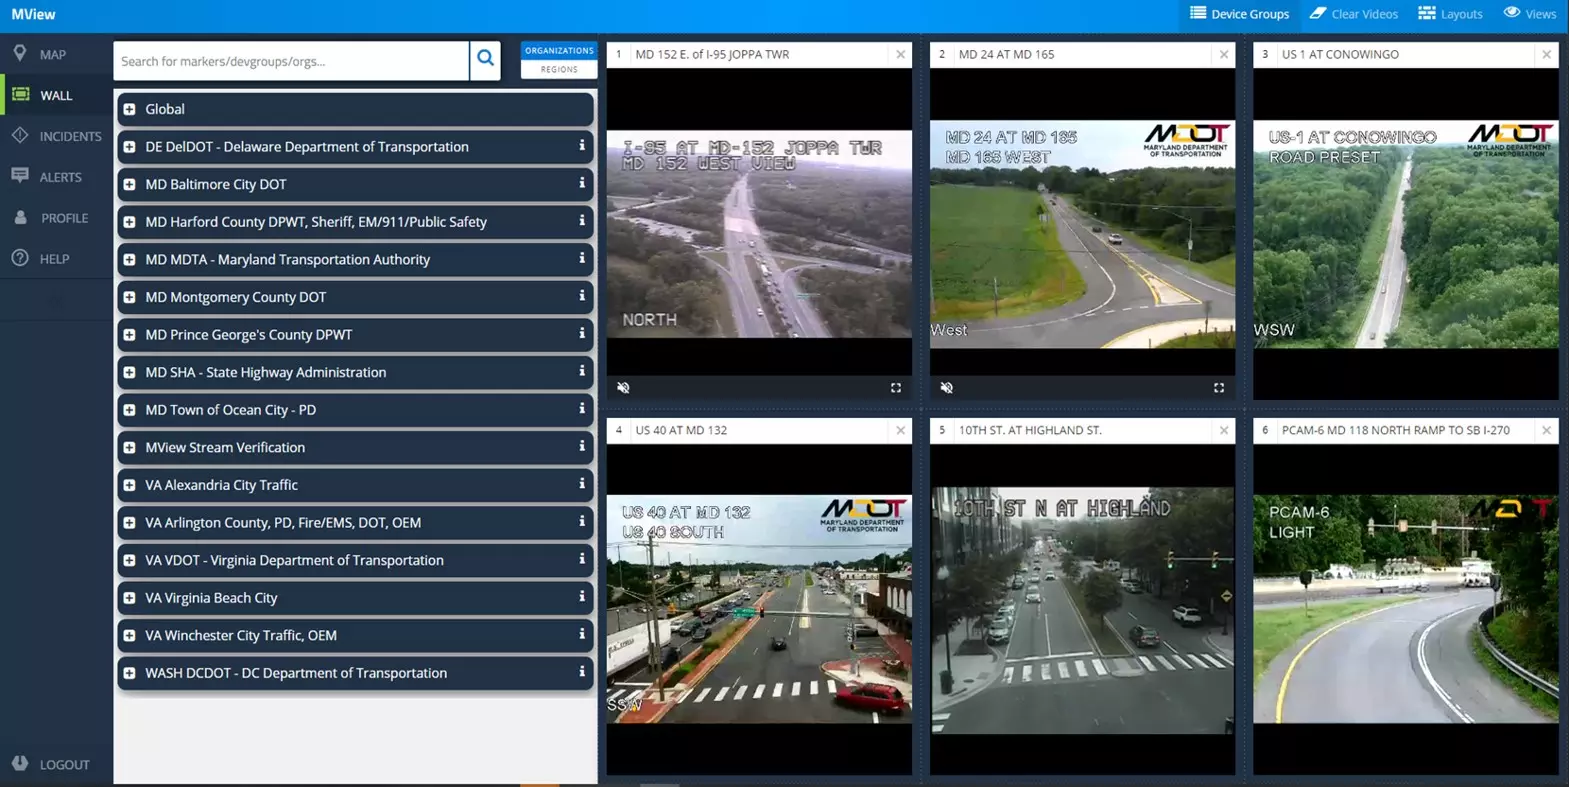 A screenshot of a website used to show video sharing entities, with multiple video feeds from the shared network of roads.